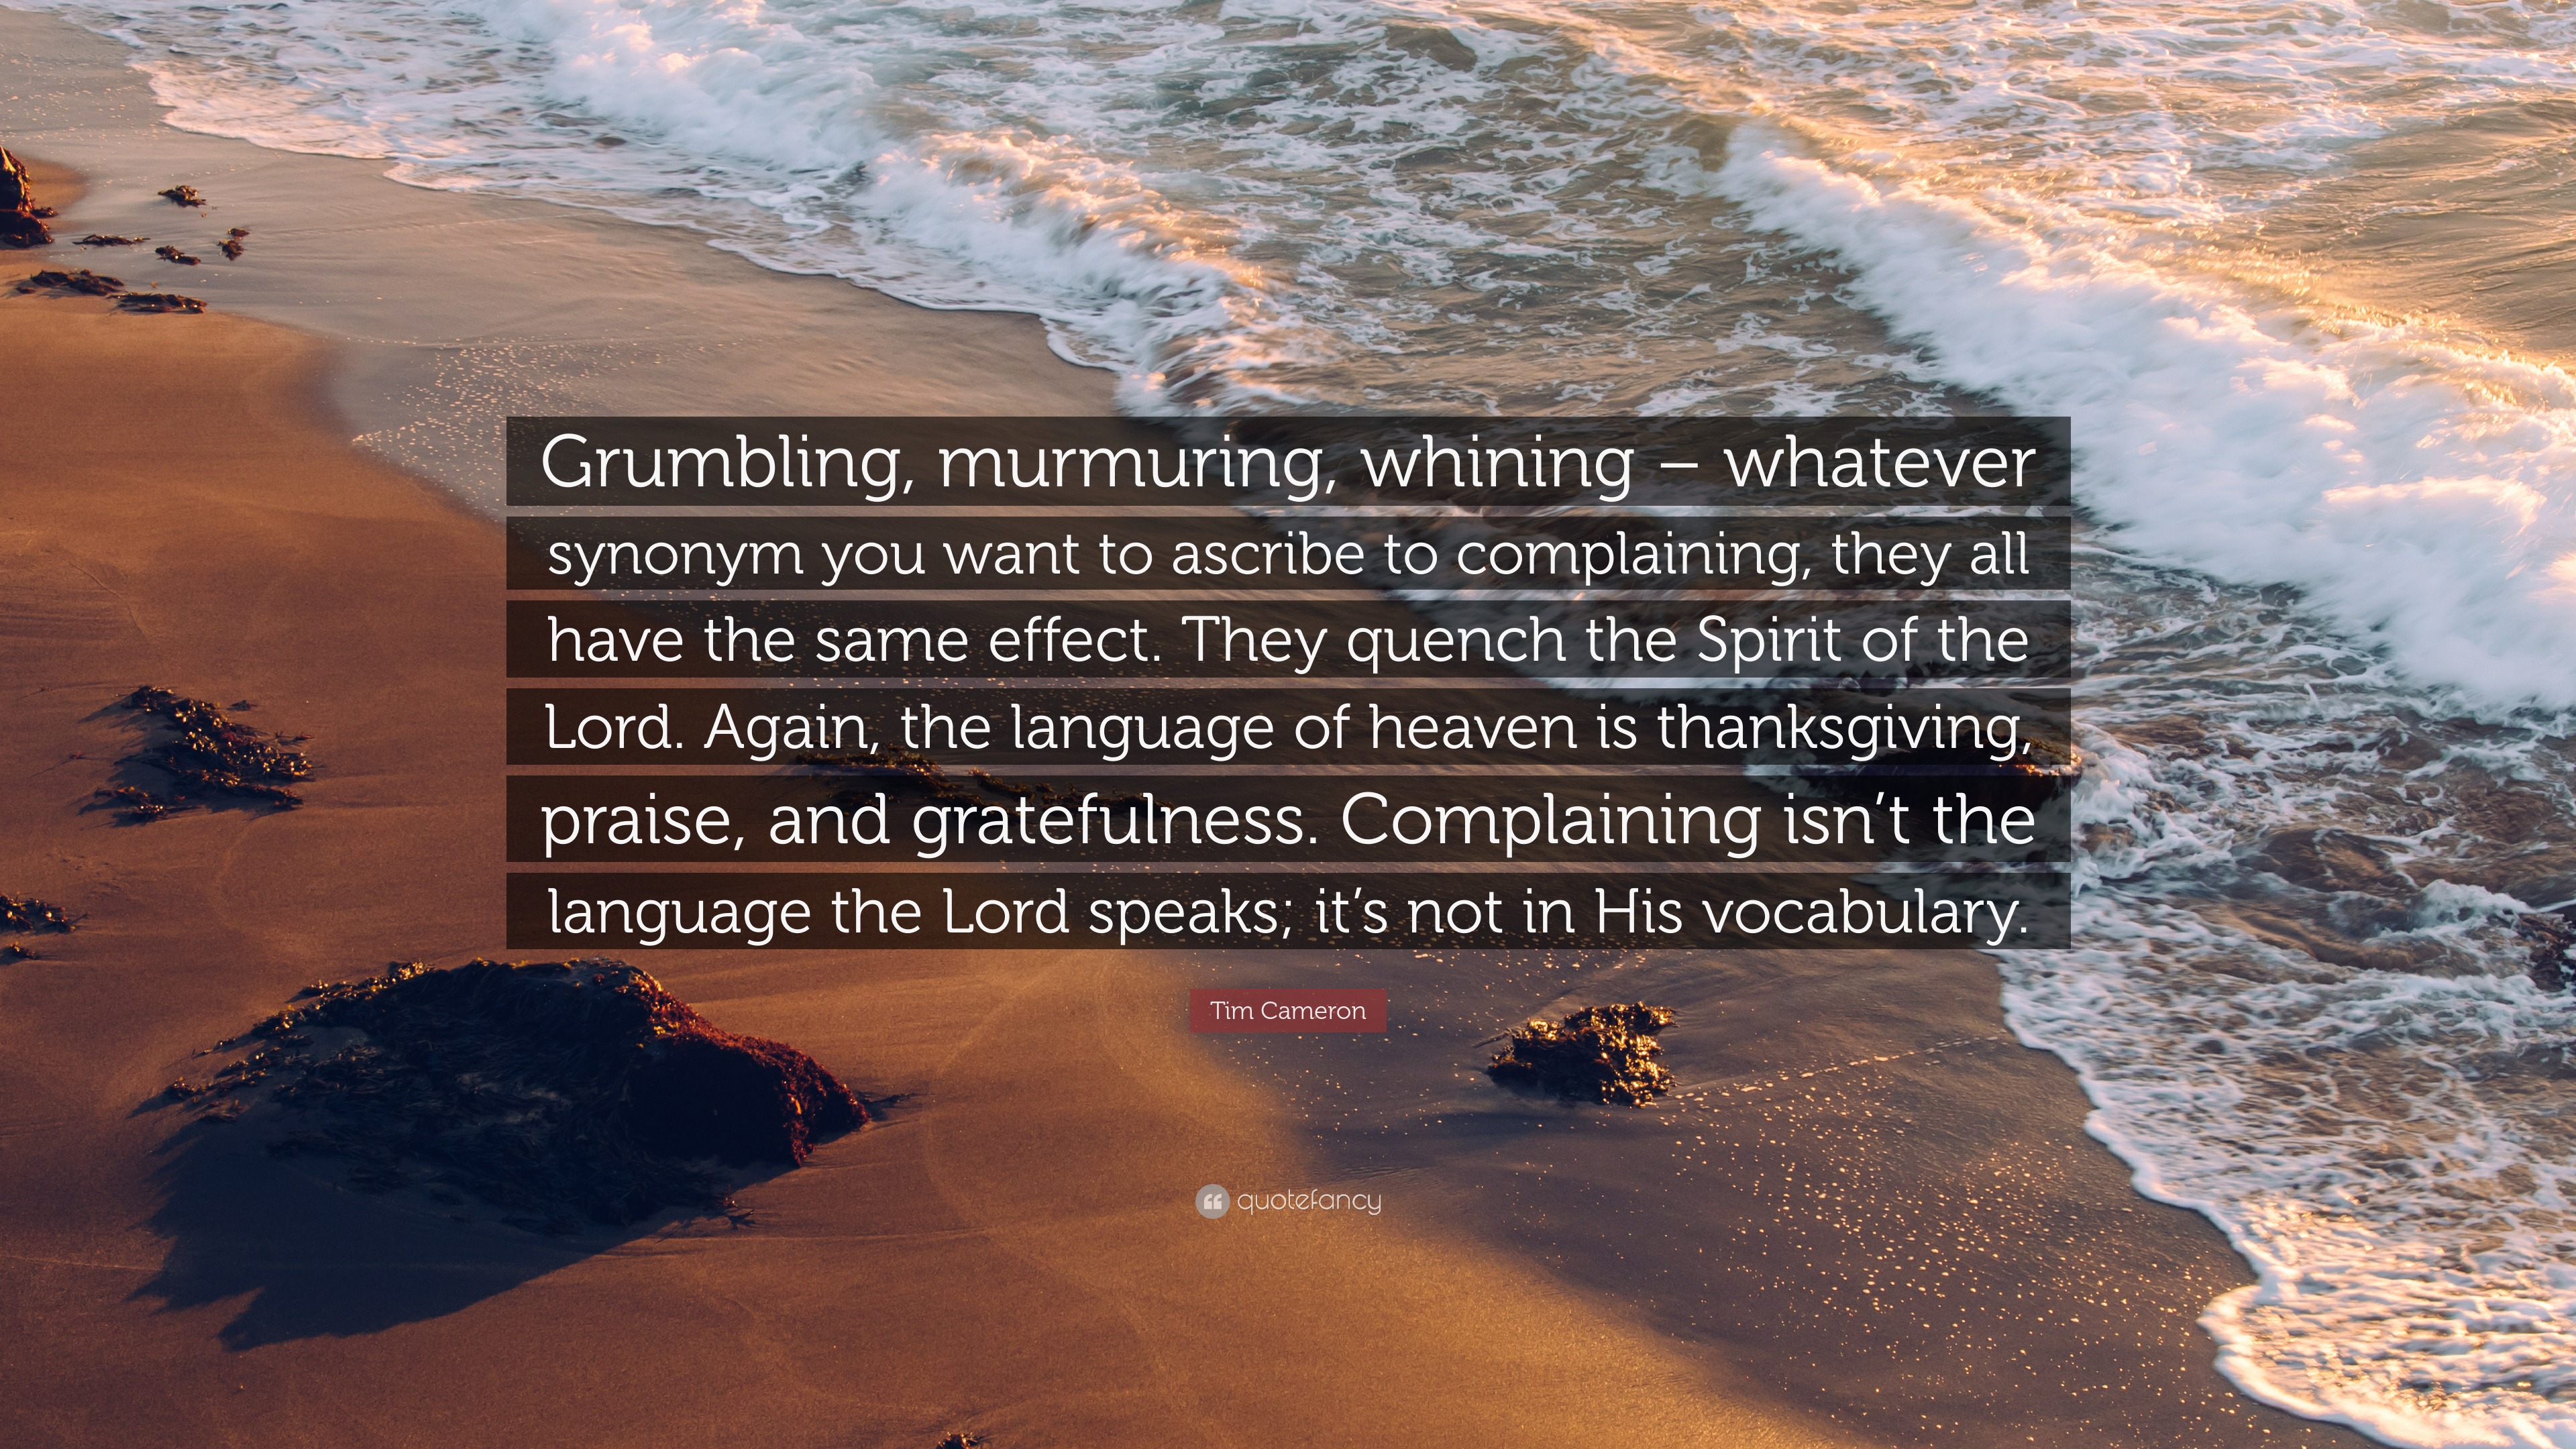 Tim Cameron Quote: “Grumbling, murmuring, whining – whatever